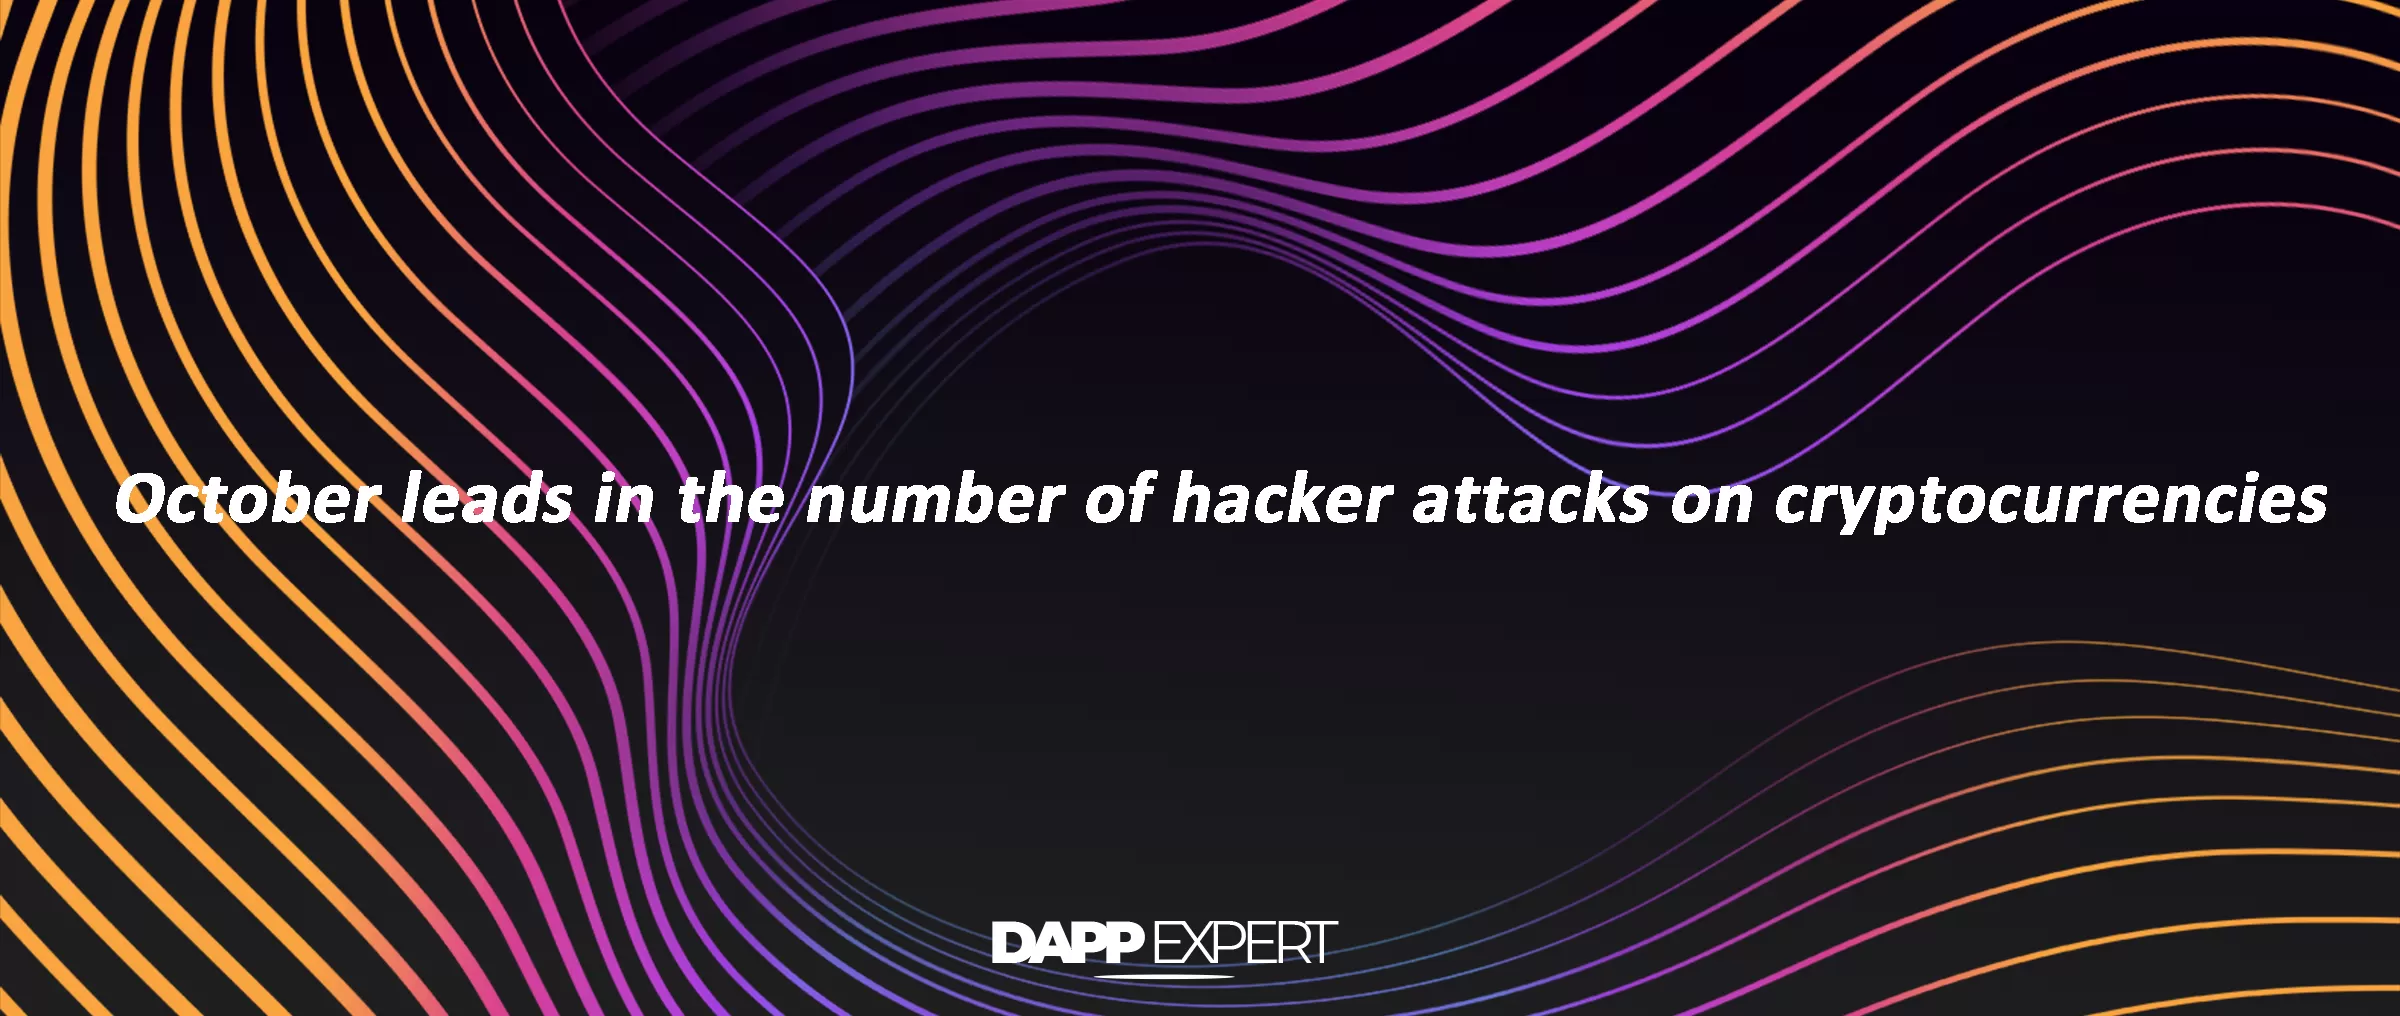 October leads in the number of hacker attacks on cryptocurrencies